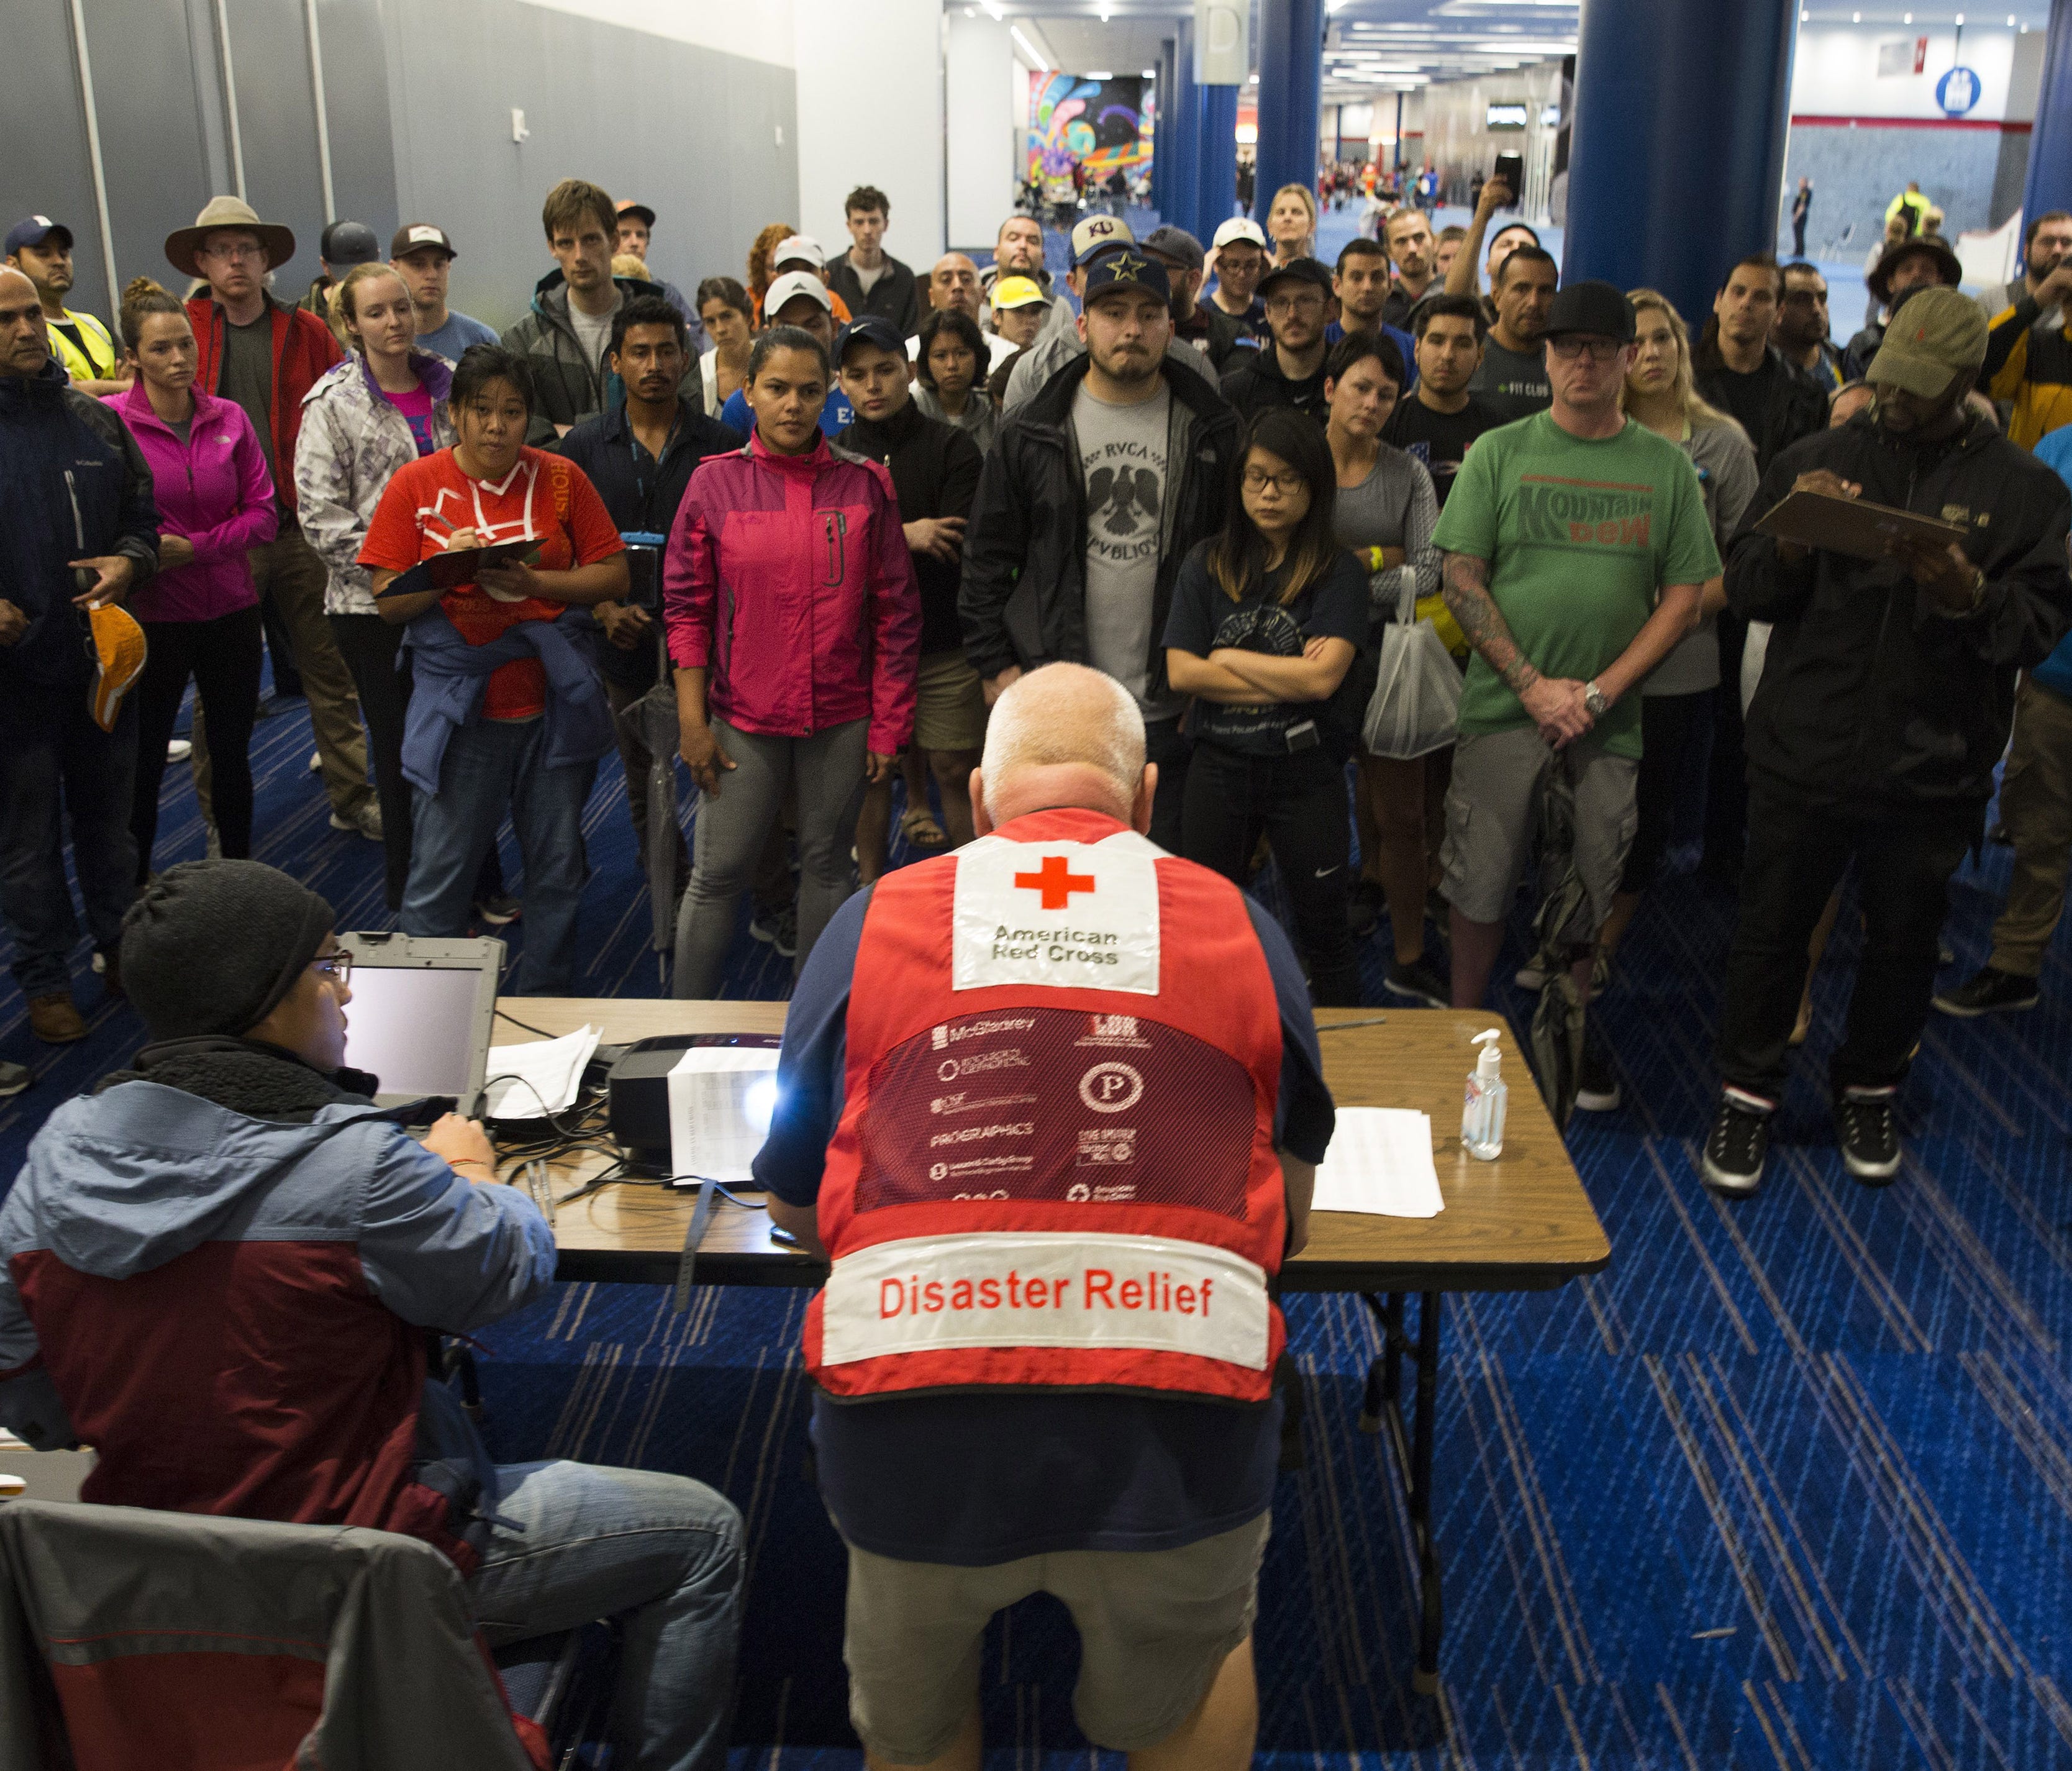 Hurricane volunteers are briefed at the George Brown Convention Center in Houston, which turned into an American Red Cross shelter after Hurricane Harvey tore through the Texas Gulf Coast in late August.